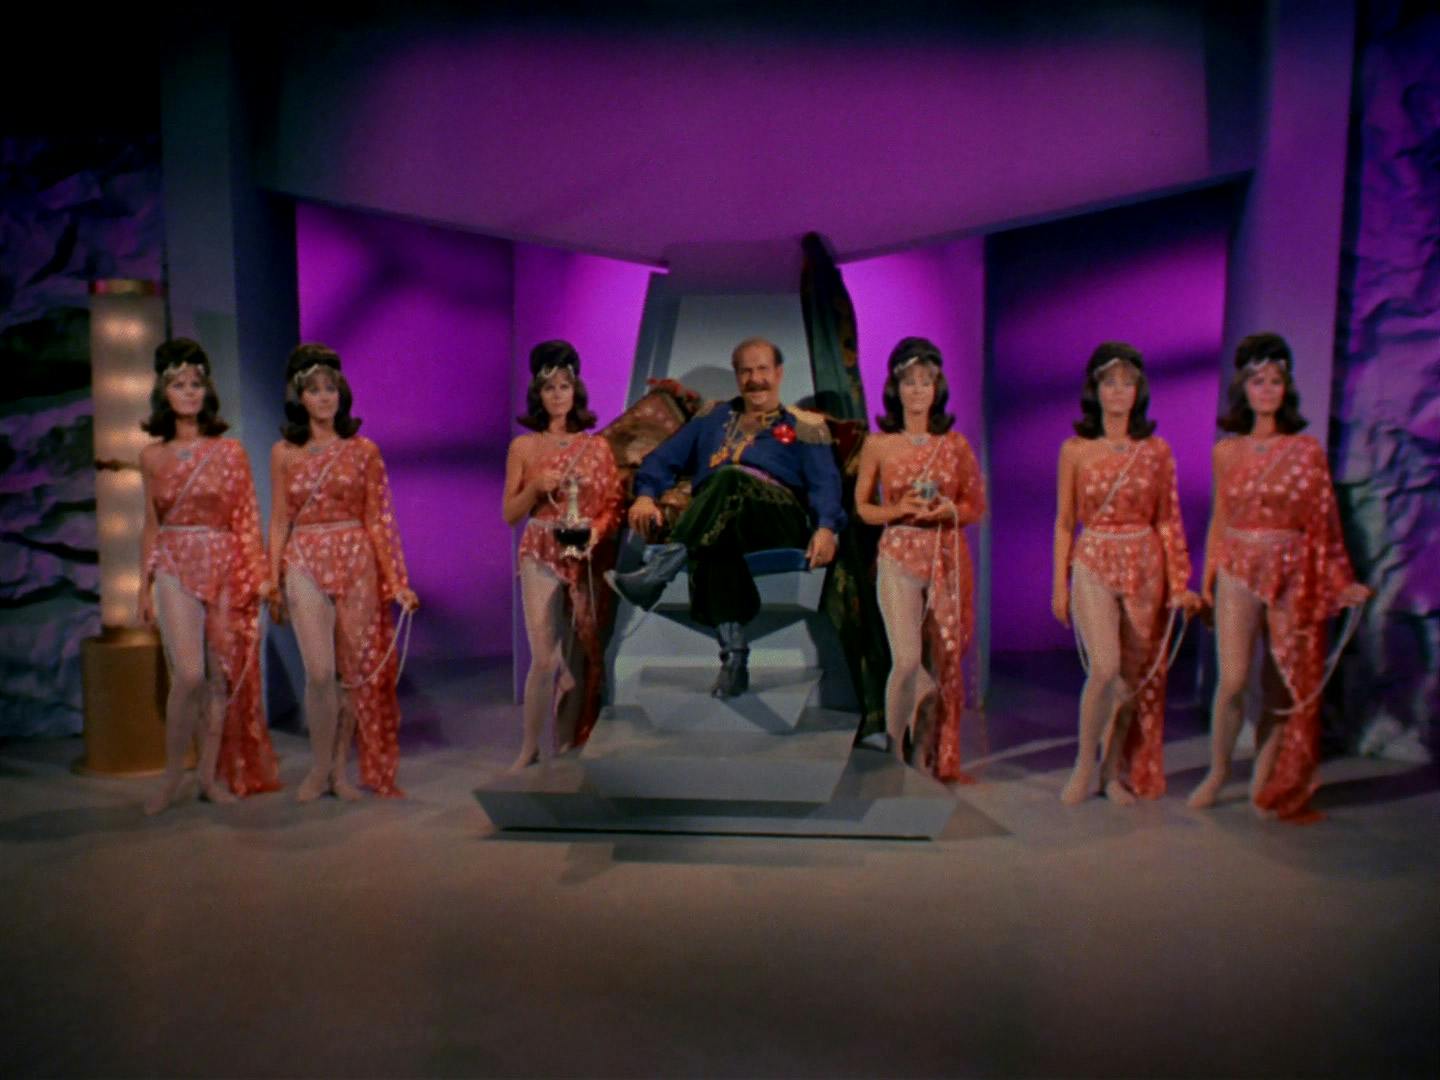 Harry Mudd sits on his throne with his legs crossed, flanked by his six identical androids in 'I, Mudd'